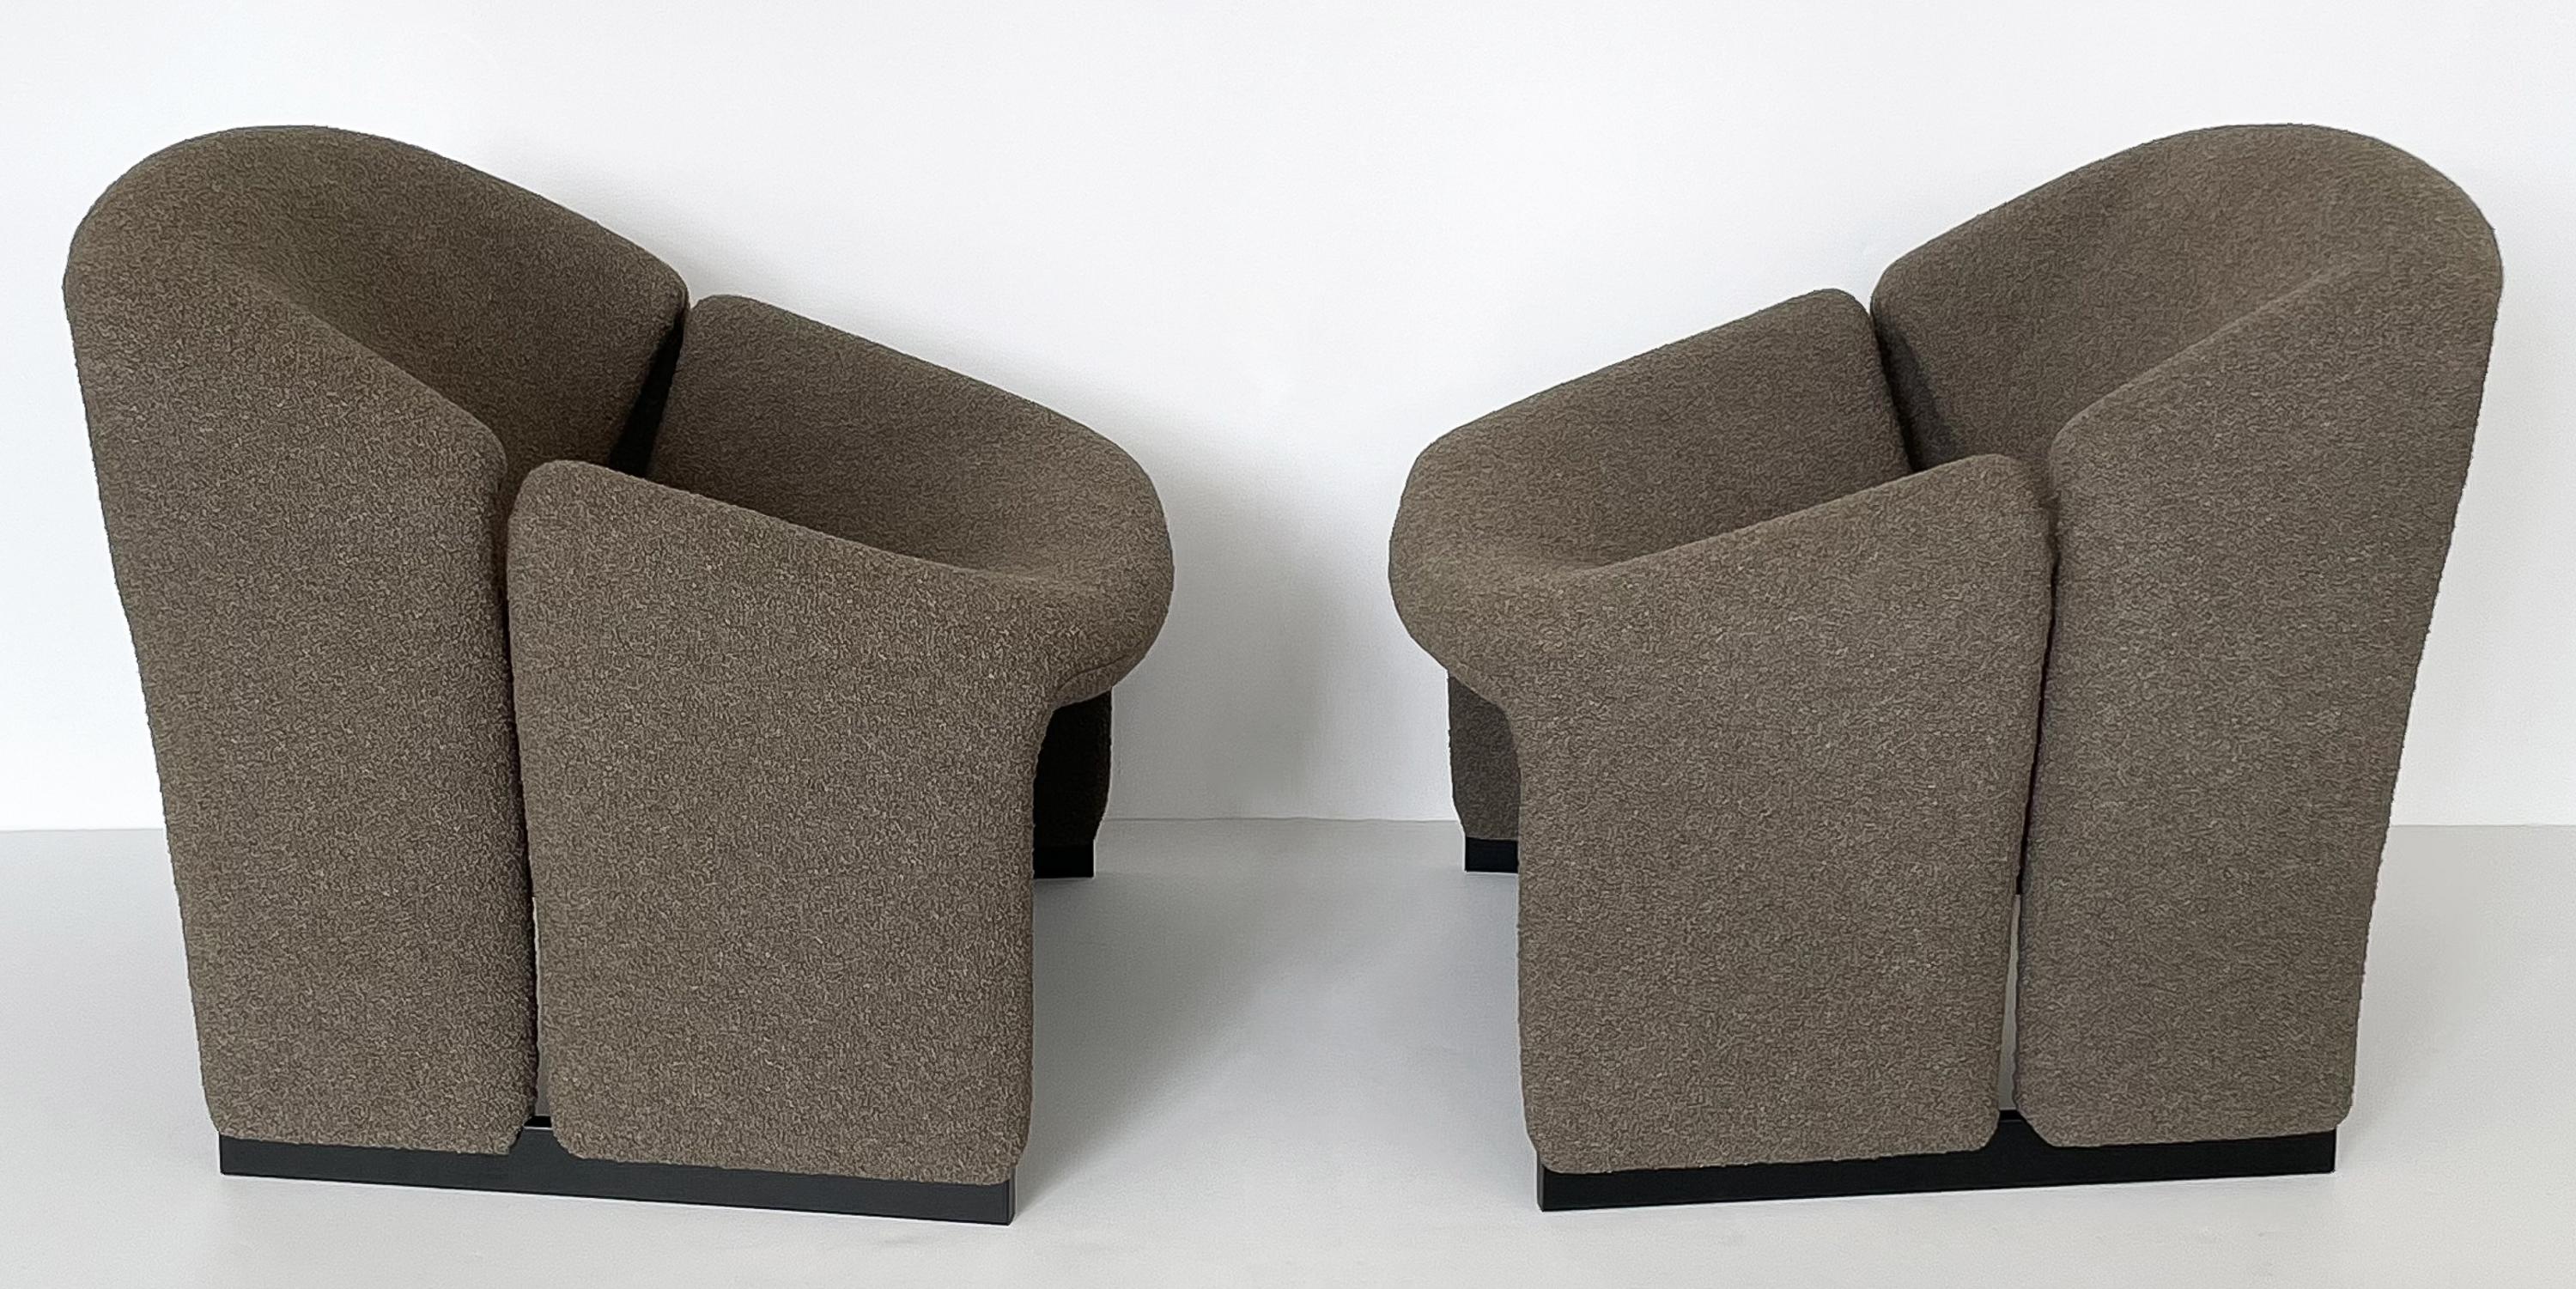 Dutch Pair of Pierre Paulin F580 1st Edition Groovy Lounge Chairs for Artifort